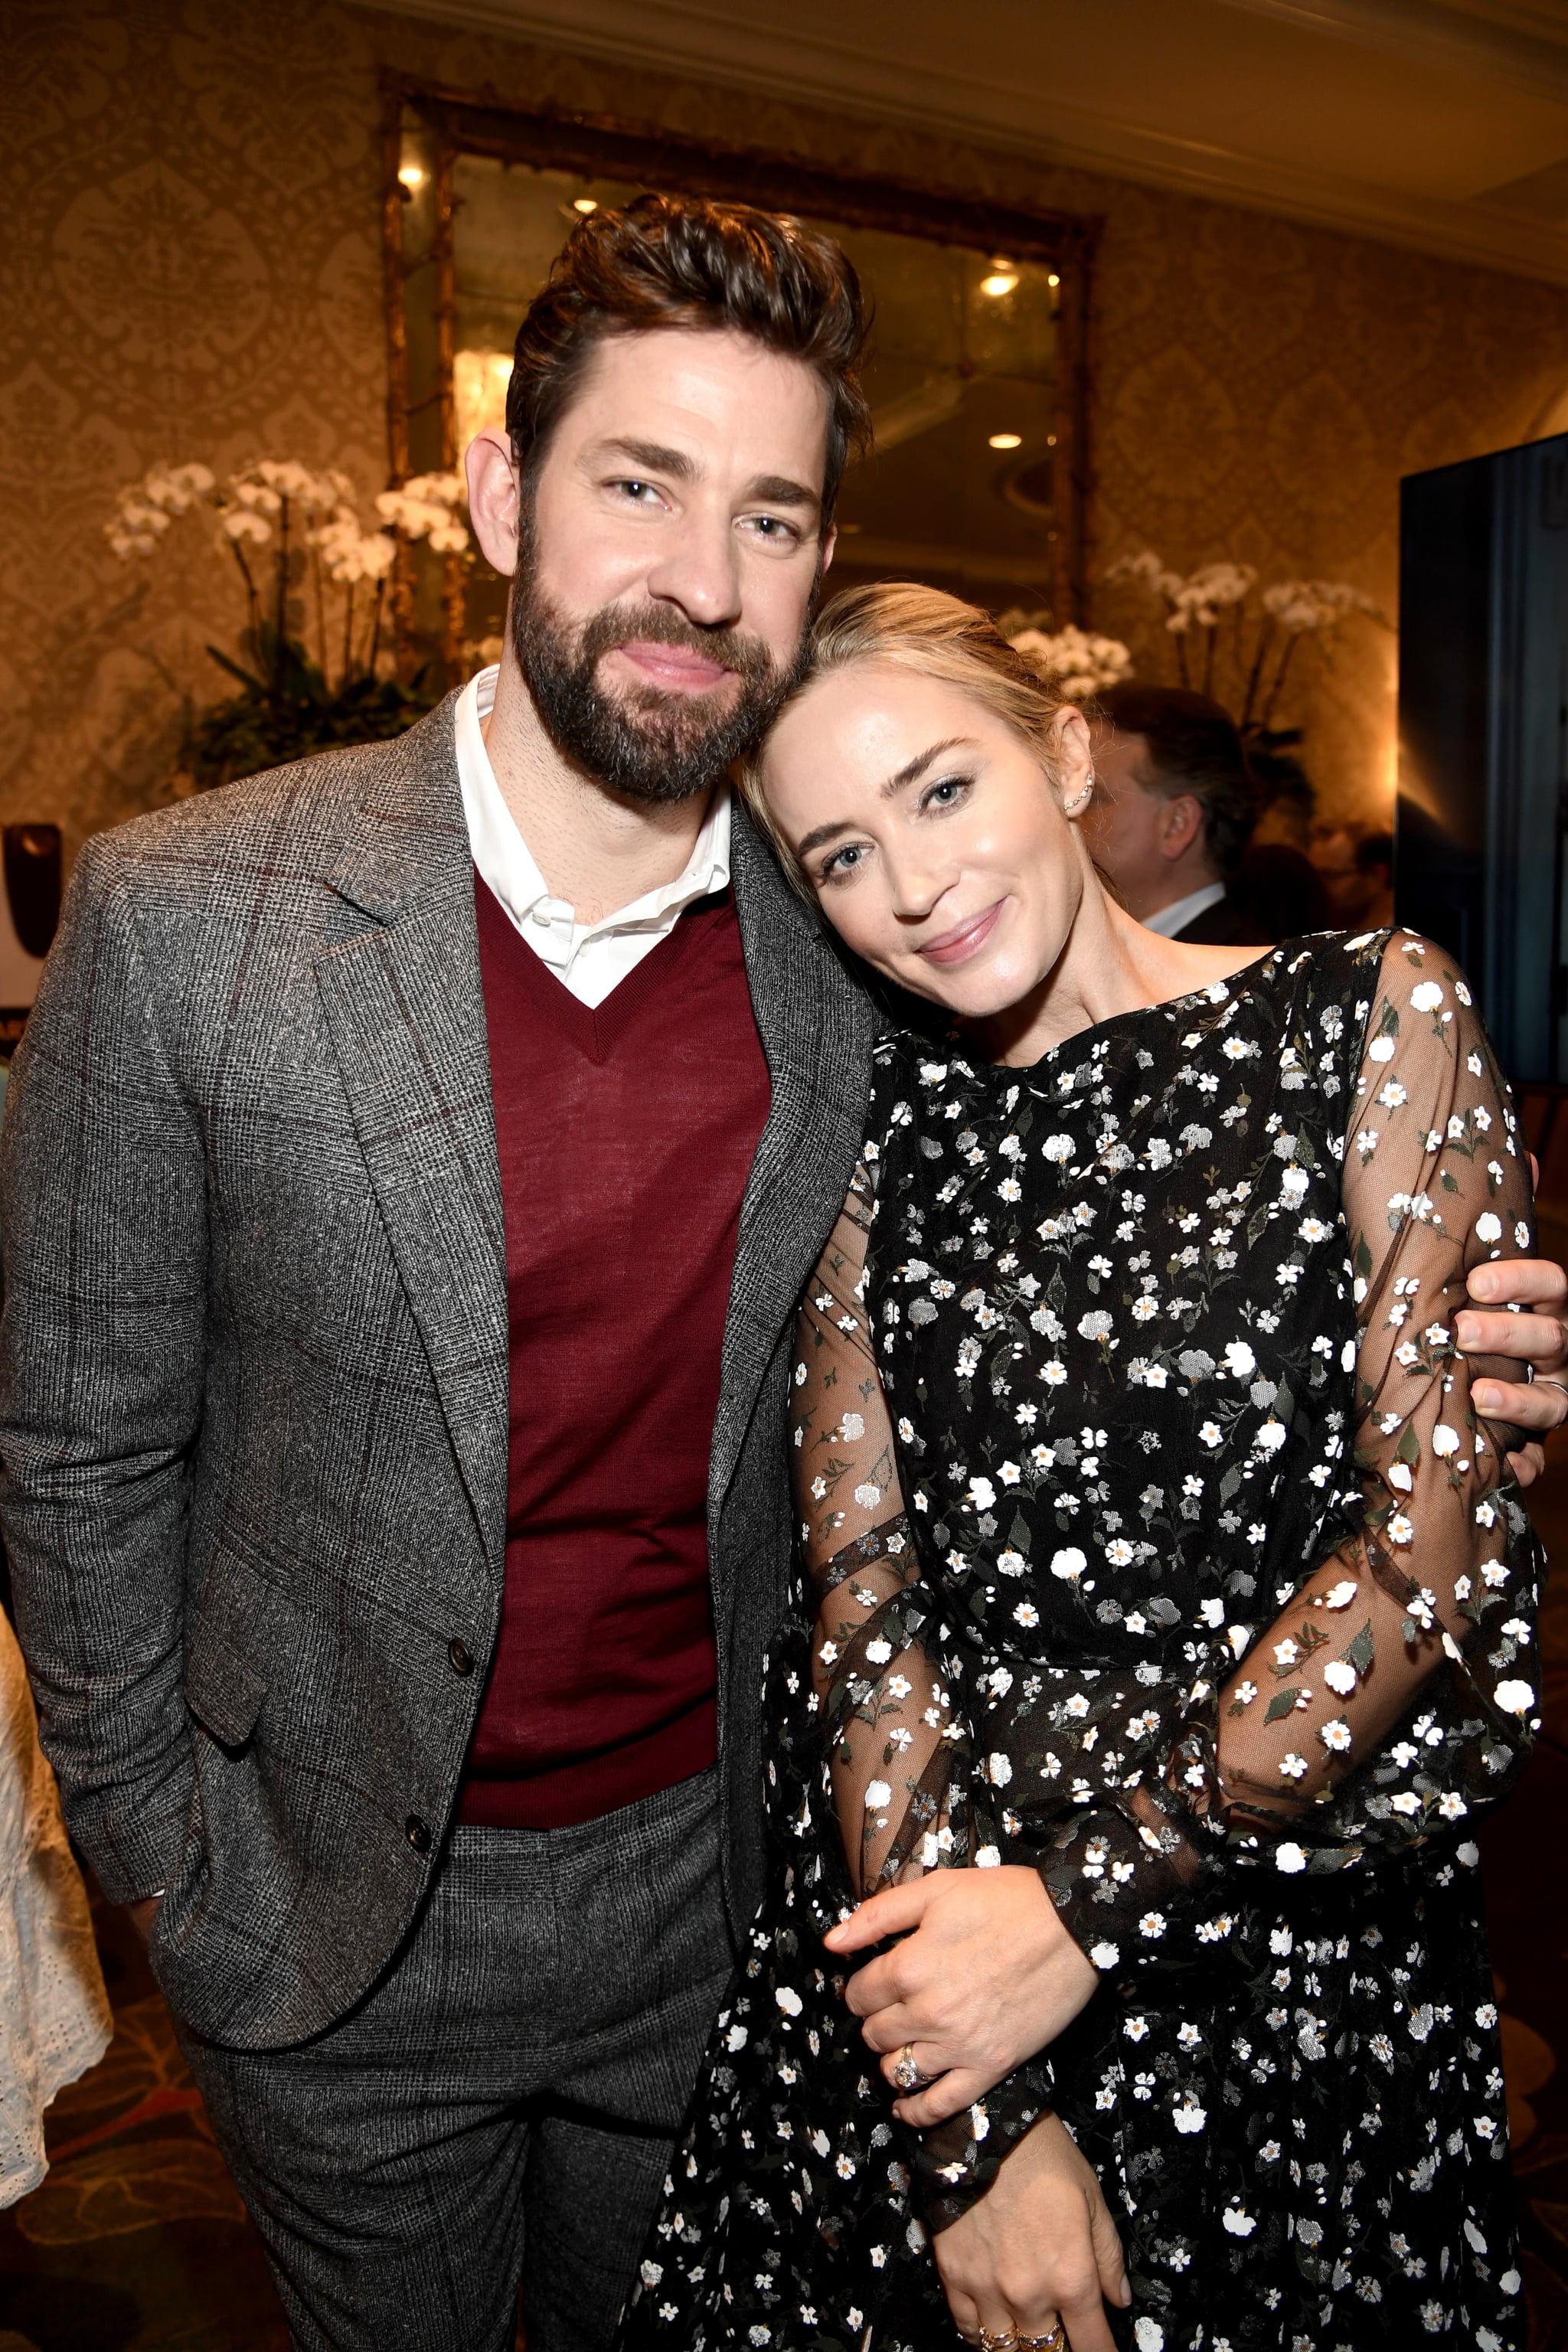 LOS ANGELES, CA - JANUARY 05:  John Krasinski (L) and Emily Blunt attend The BAFTA Los Angeles Tea Party at Four Seasons Hotel Los Angeles at Beverly Hills on January 5, 2019 in Los Angeles, California.  (Photo by Frazer Harrison/BAFTA LA/Getty Images for BAFTA LA)